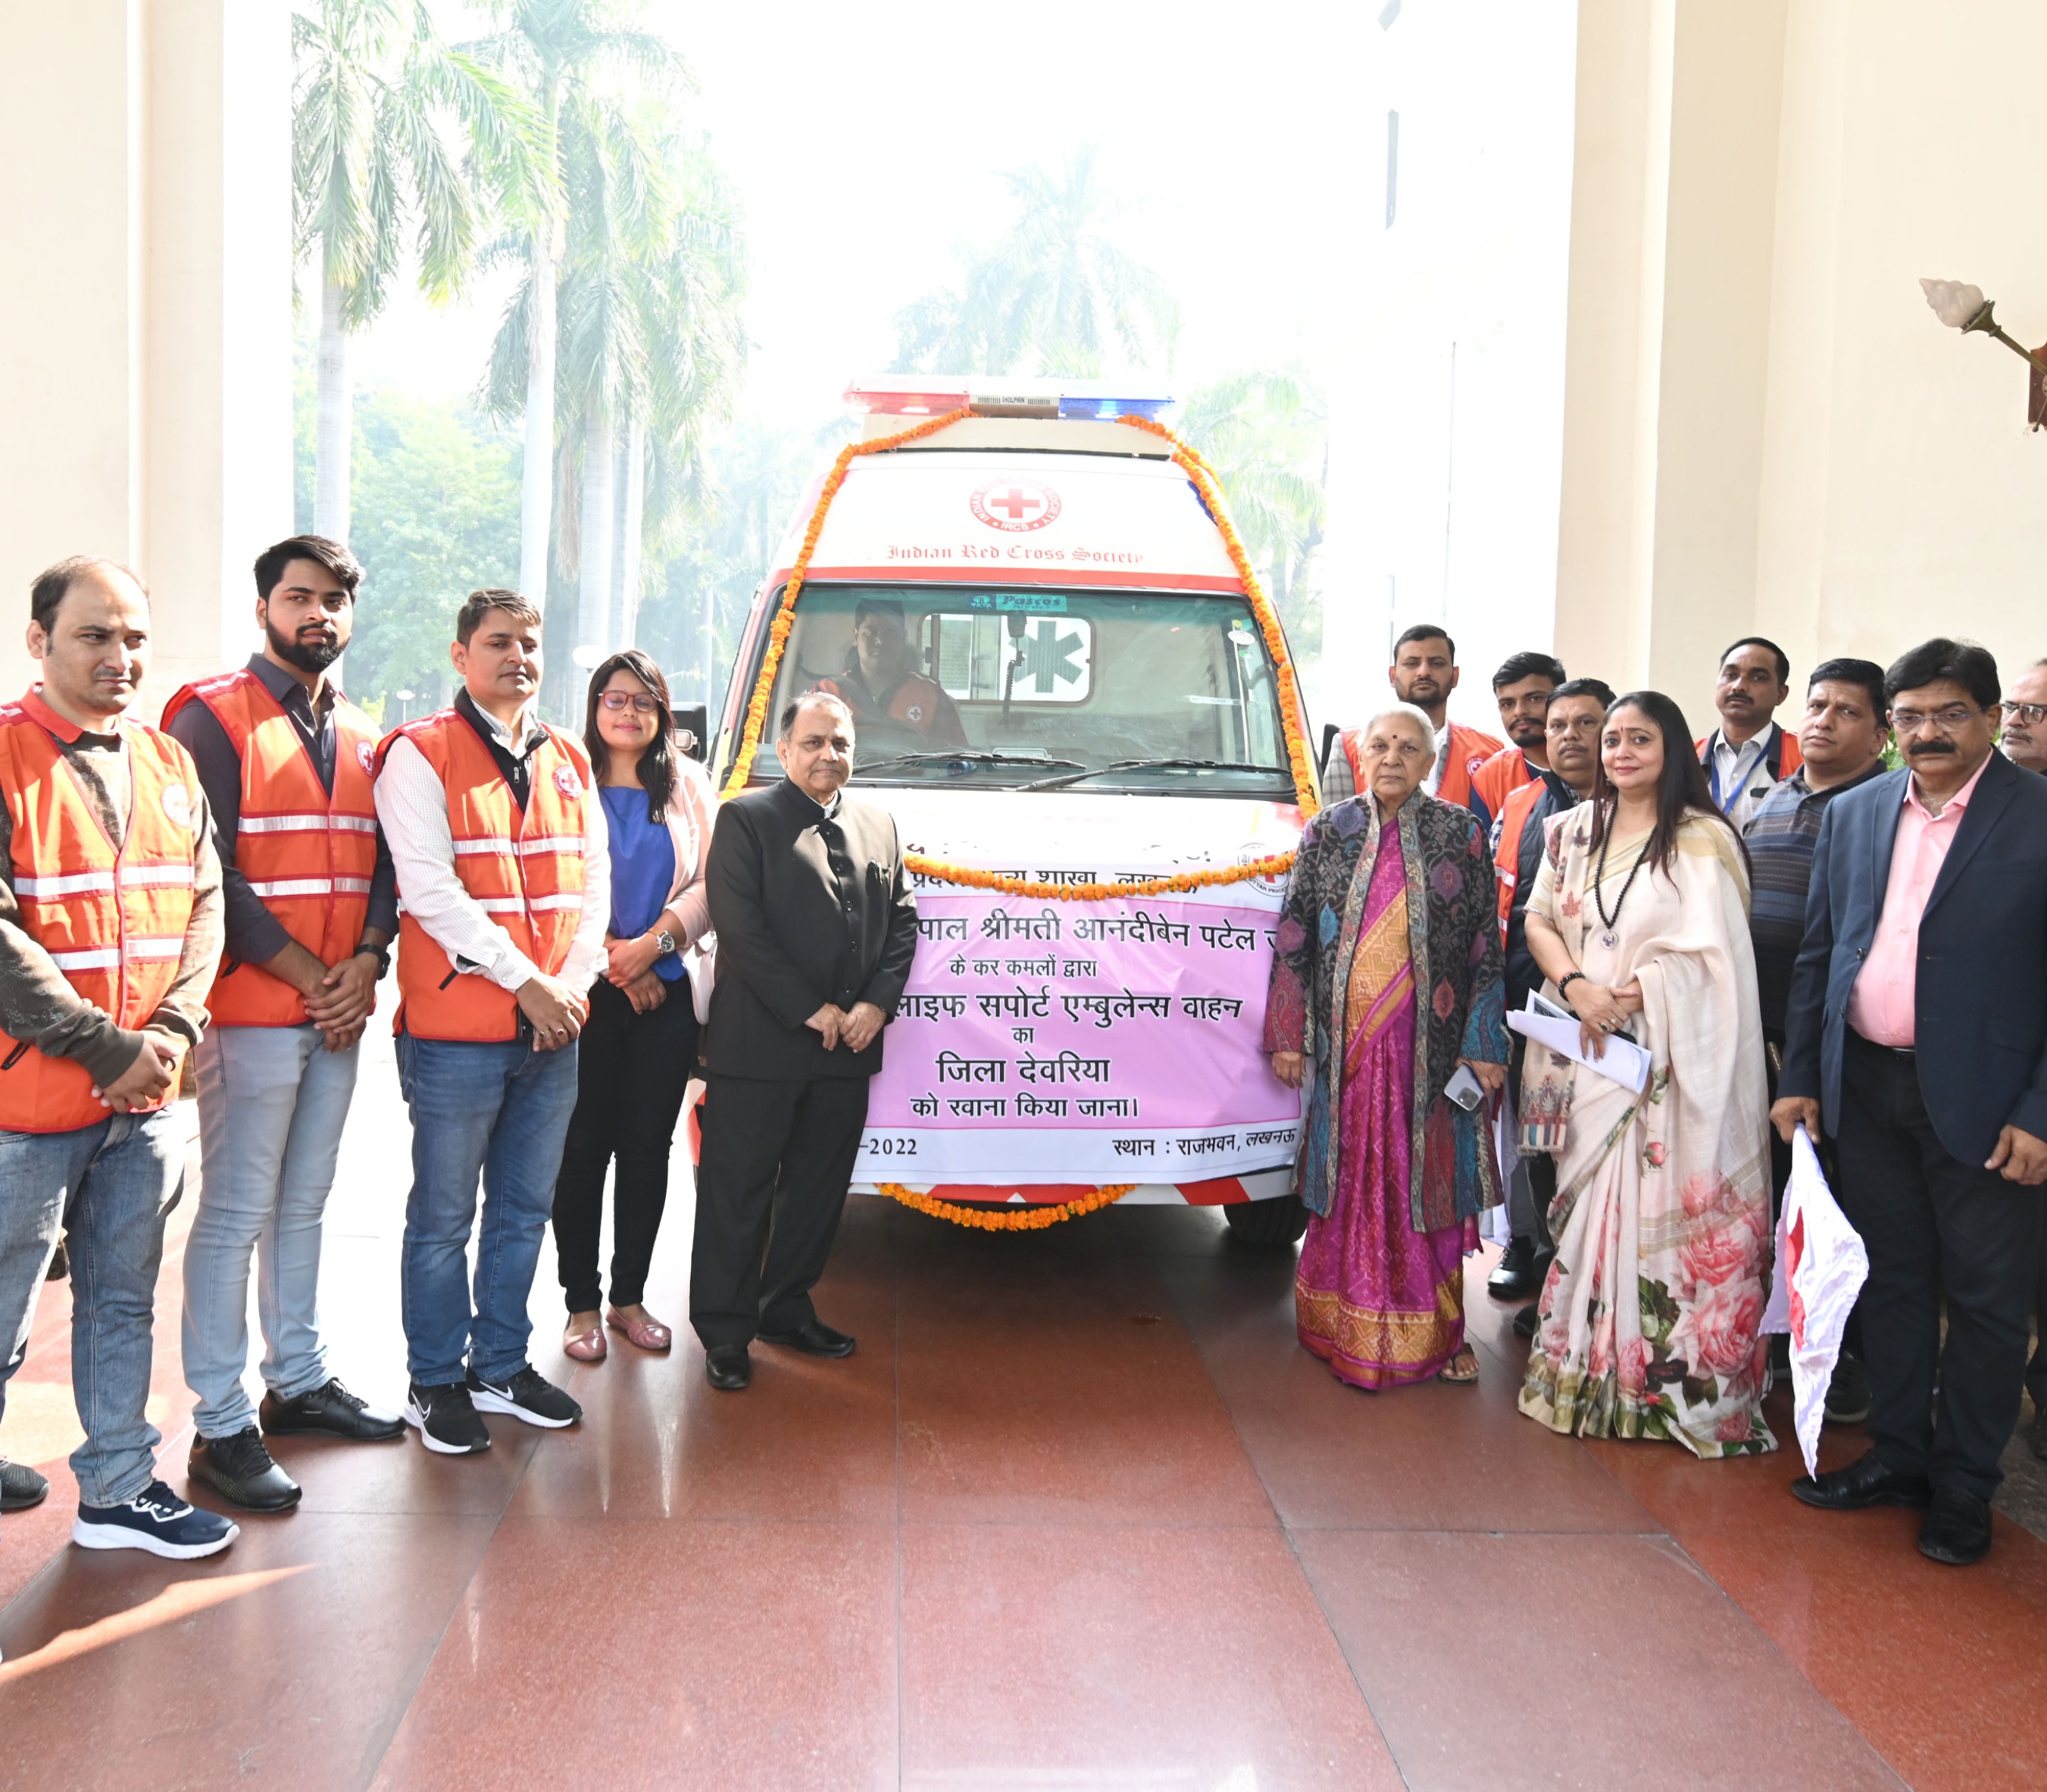 The Governor flagged off the ambulance